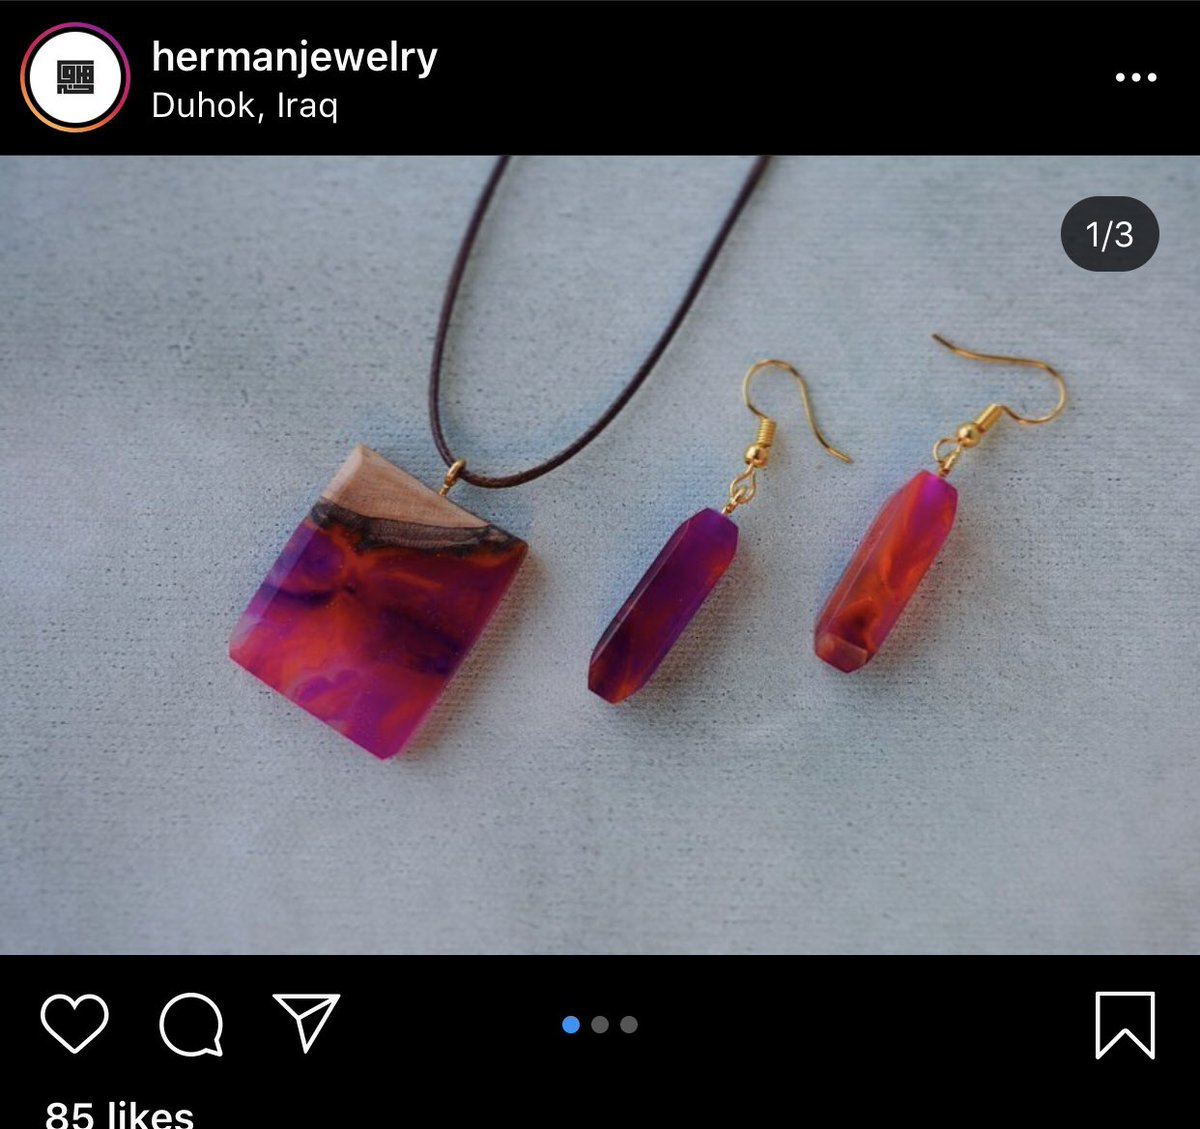 9 - @/hermanjewelery on instagramA jewellery shop based in Duhok, everything is handmade and you can request specific things as well